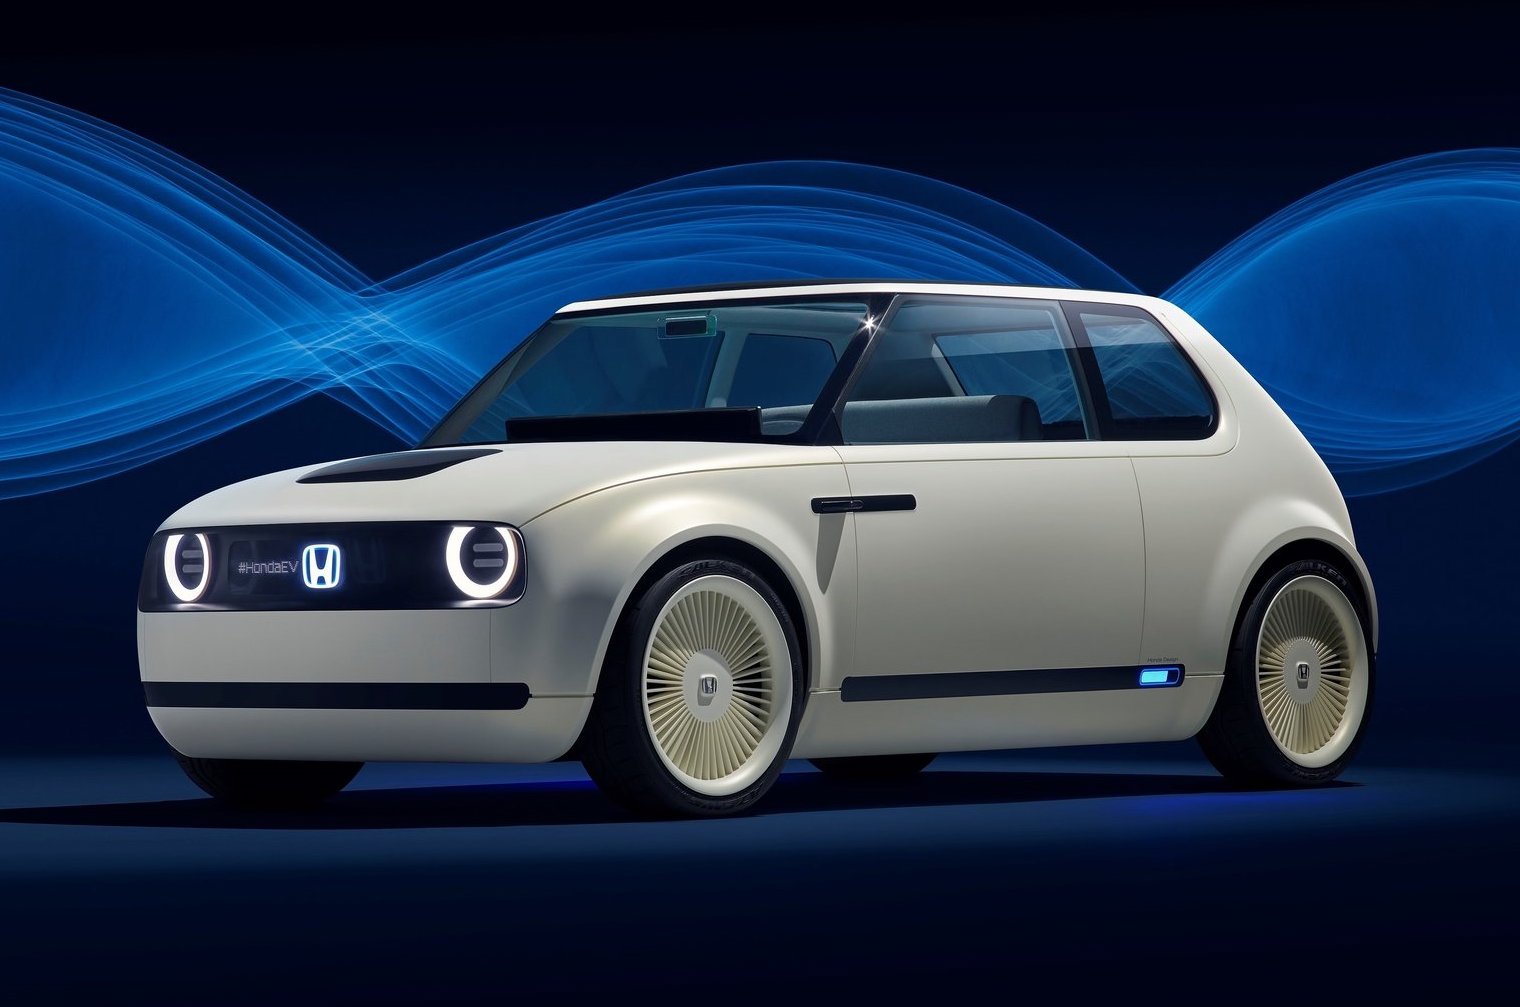 Production Honda Urban EV concept confirmed for “early 2019”